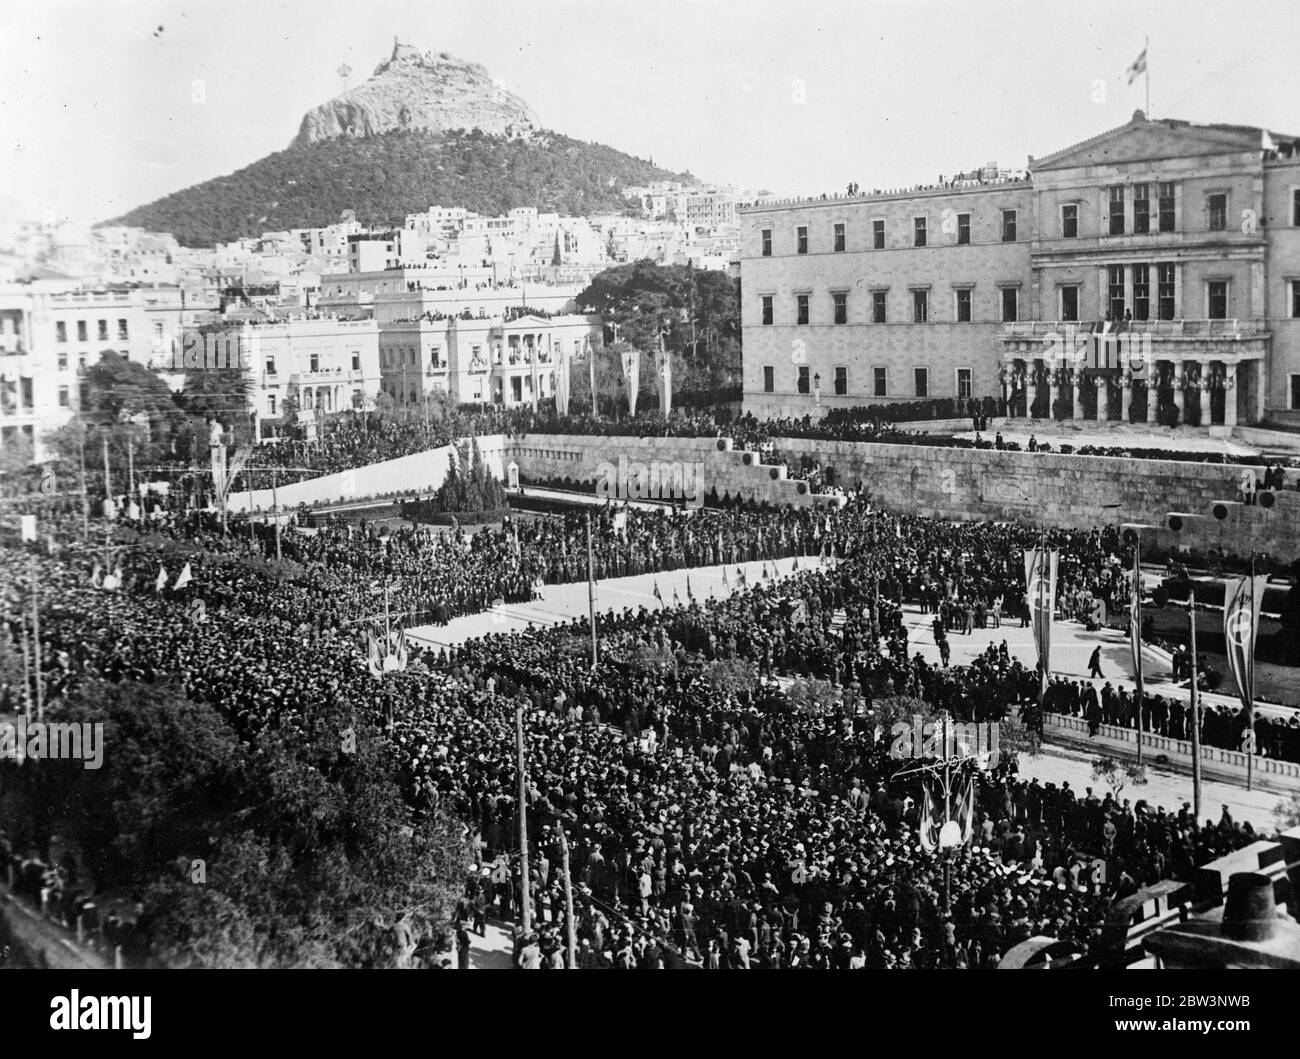 King George of the Hellenes returns from exile . Enthusiastic welcome from huge crowds at Athens . A view of the enormous crowds gathered to greet King George on his arrival in Athens . 27 November 1935 Stock Photo